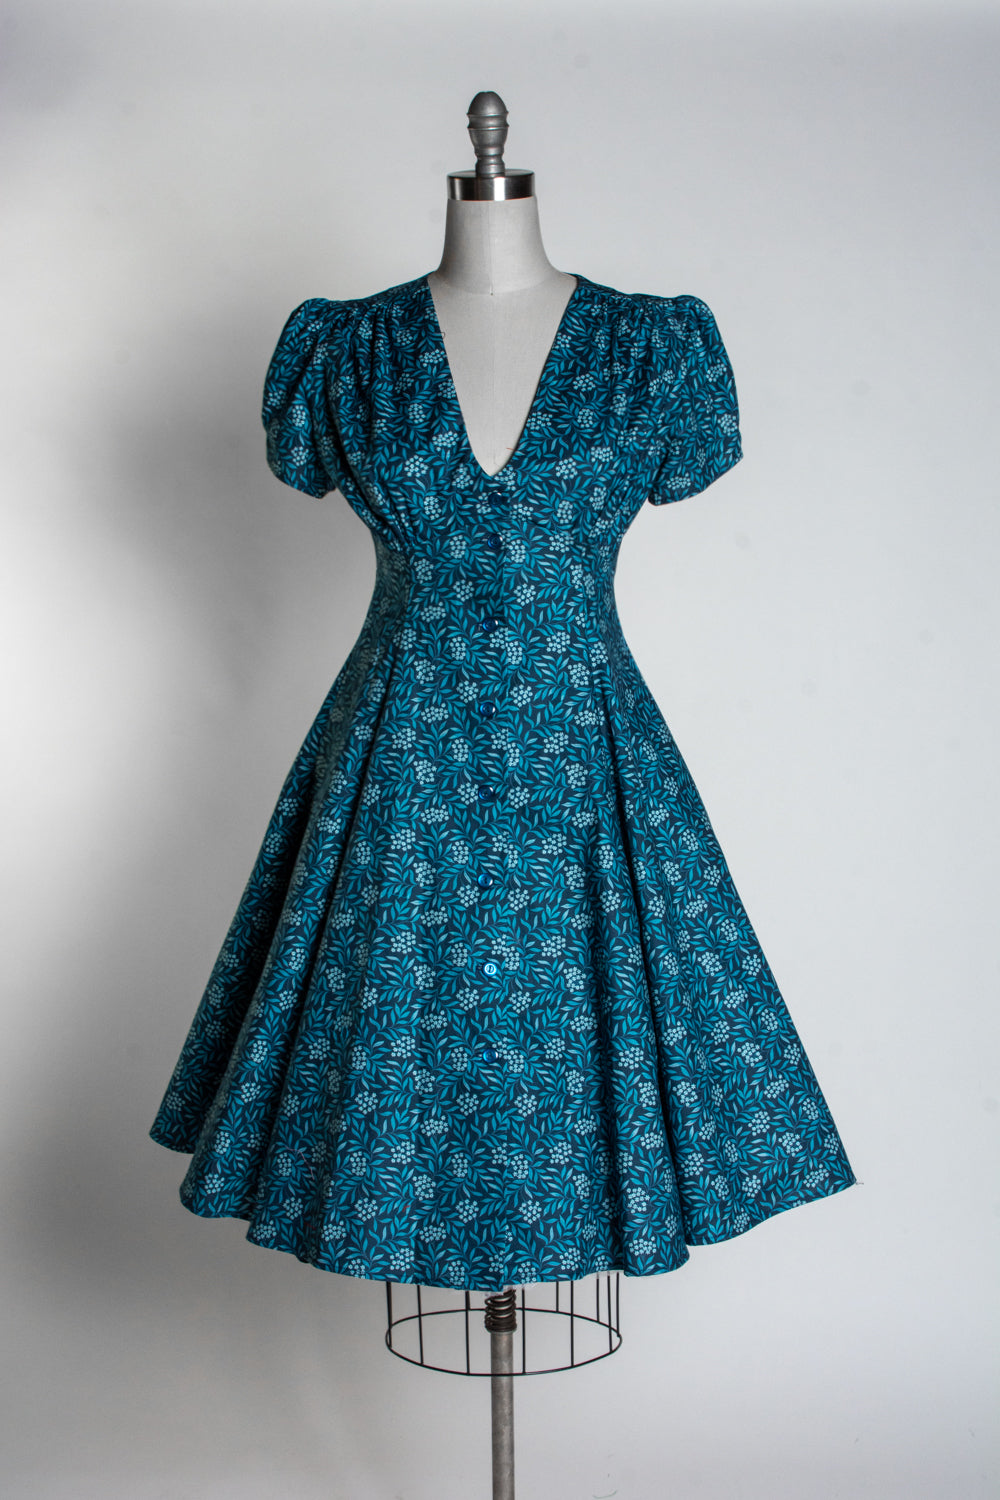 Millie Dress - Forget Me Not